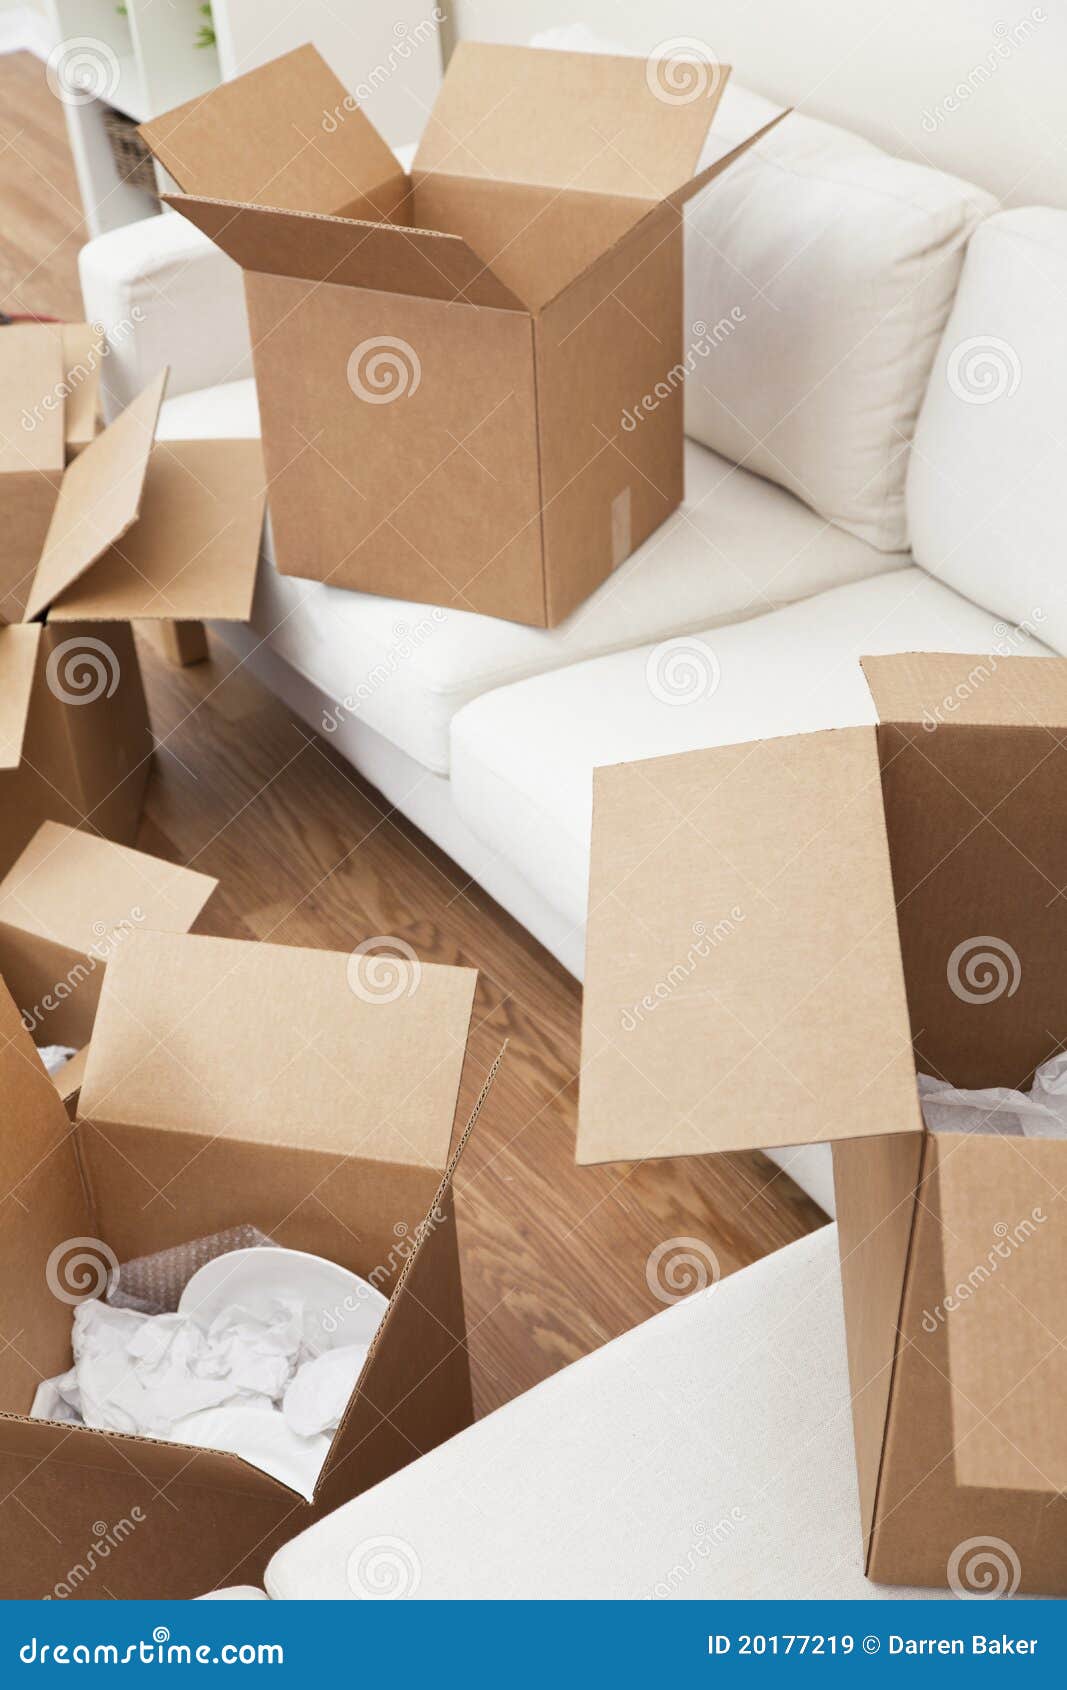 cardboard boxes for moving